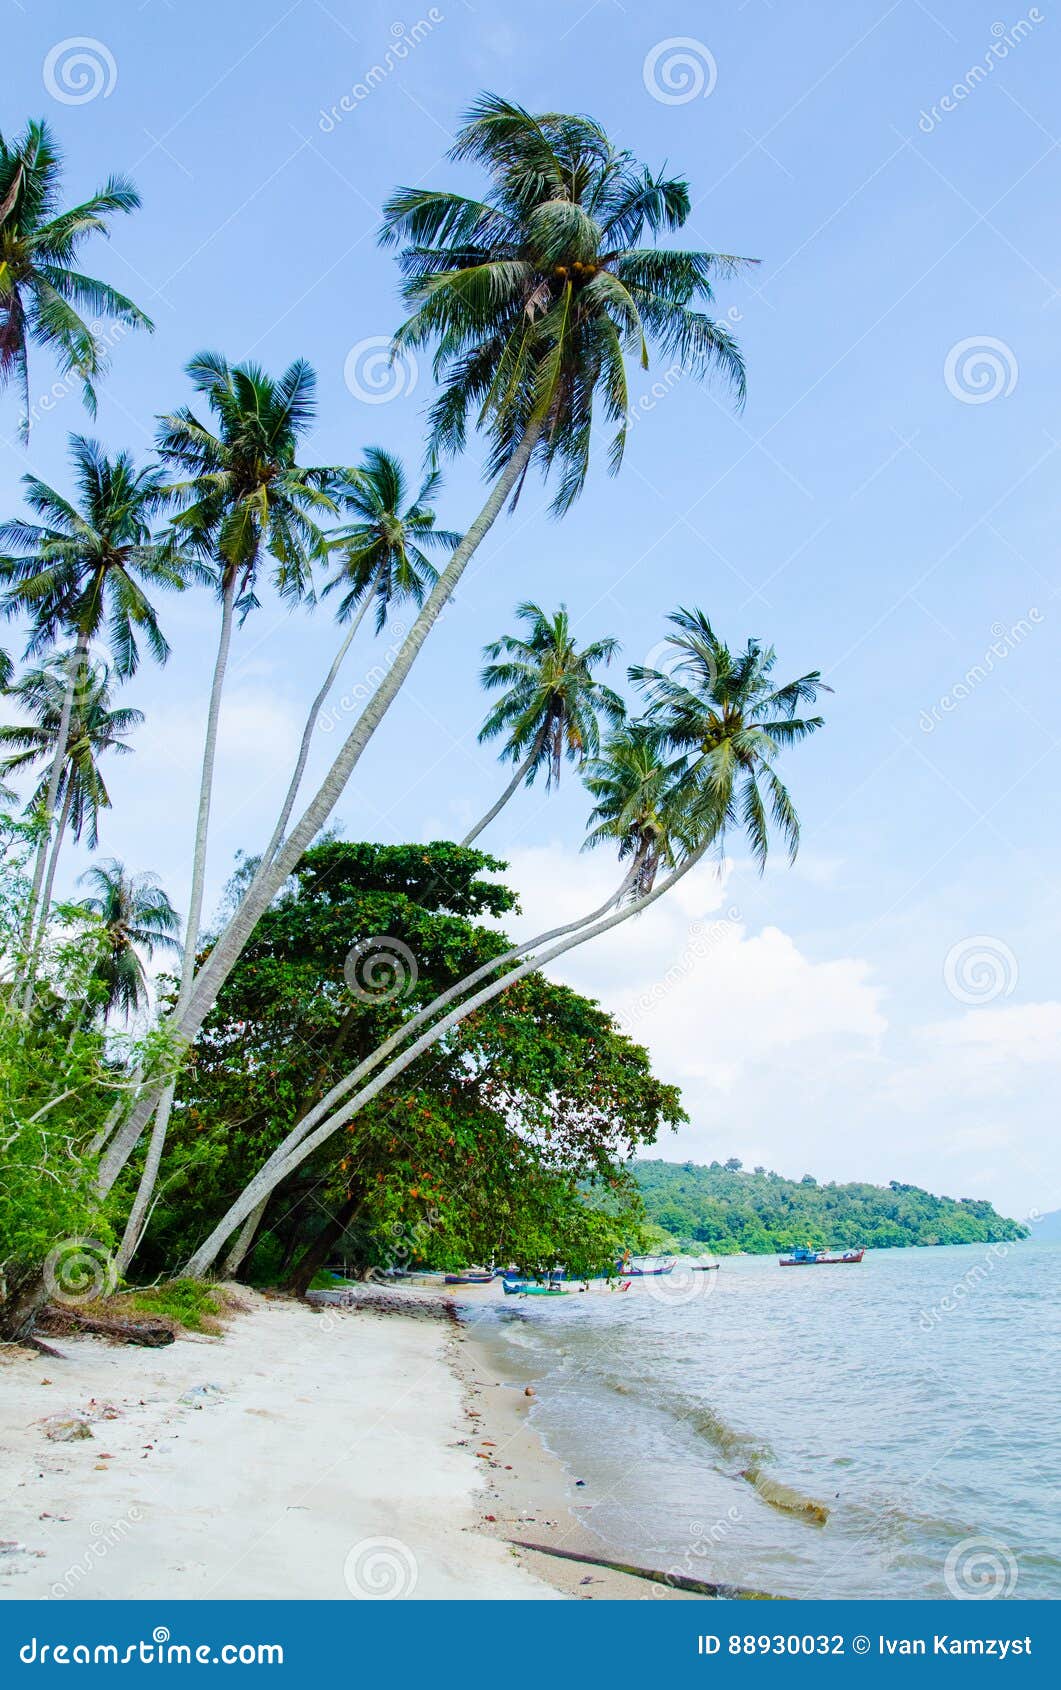 Malaysia Tropic Beach with Crystal Clear Sea Stock Photo - Image of ...